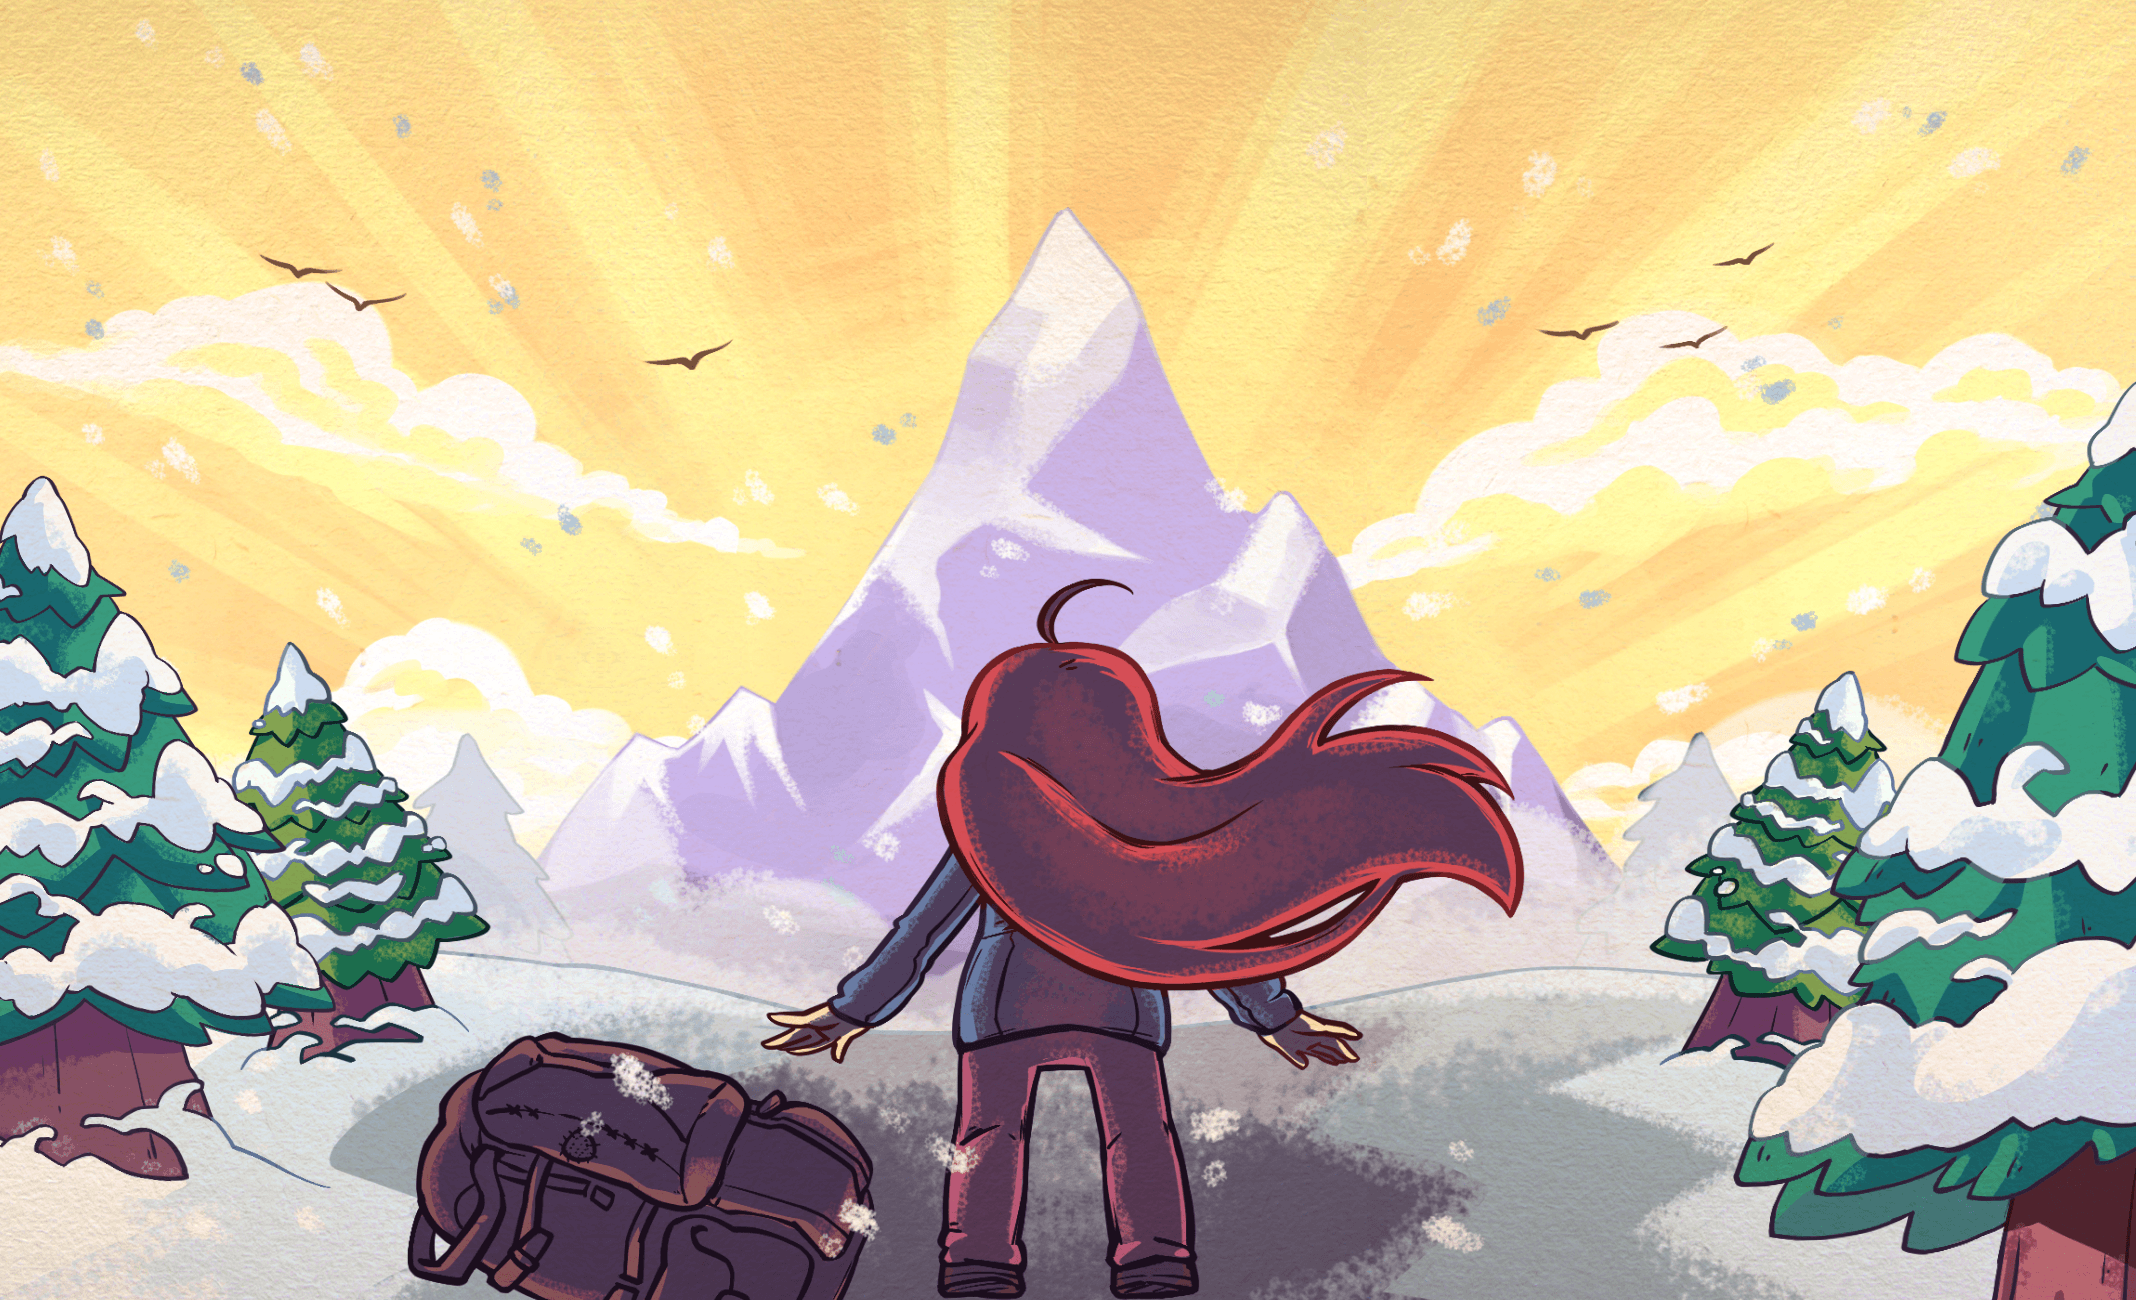 Celeste HD Wallpaper and Background Image